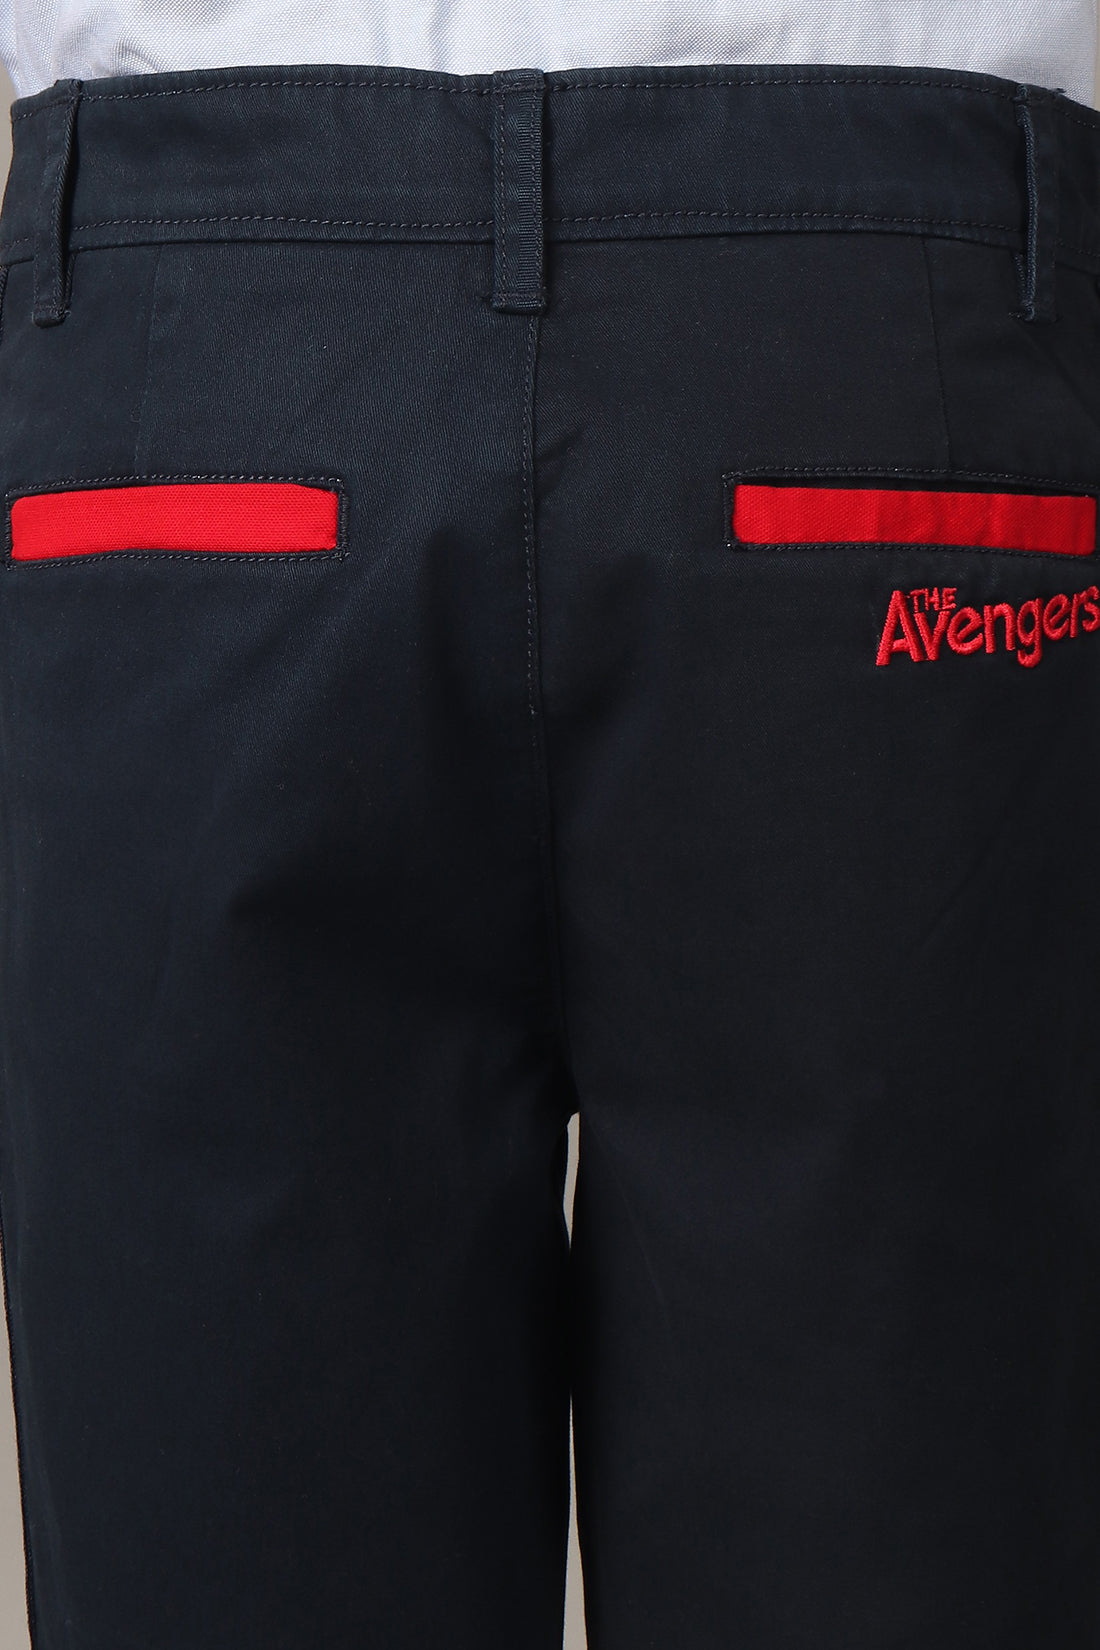 One Friday Kids Boys 100% Cotton Navy Blue Trouser With Contrast Side Detail